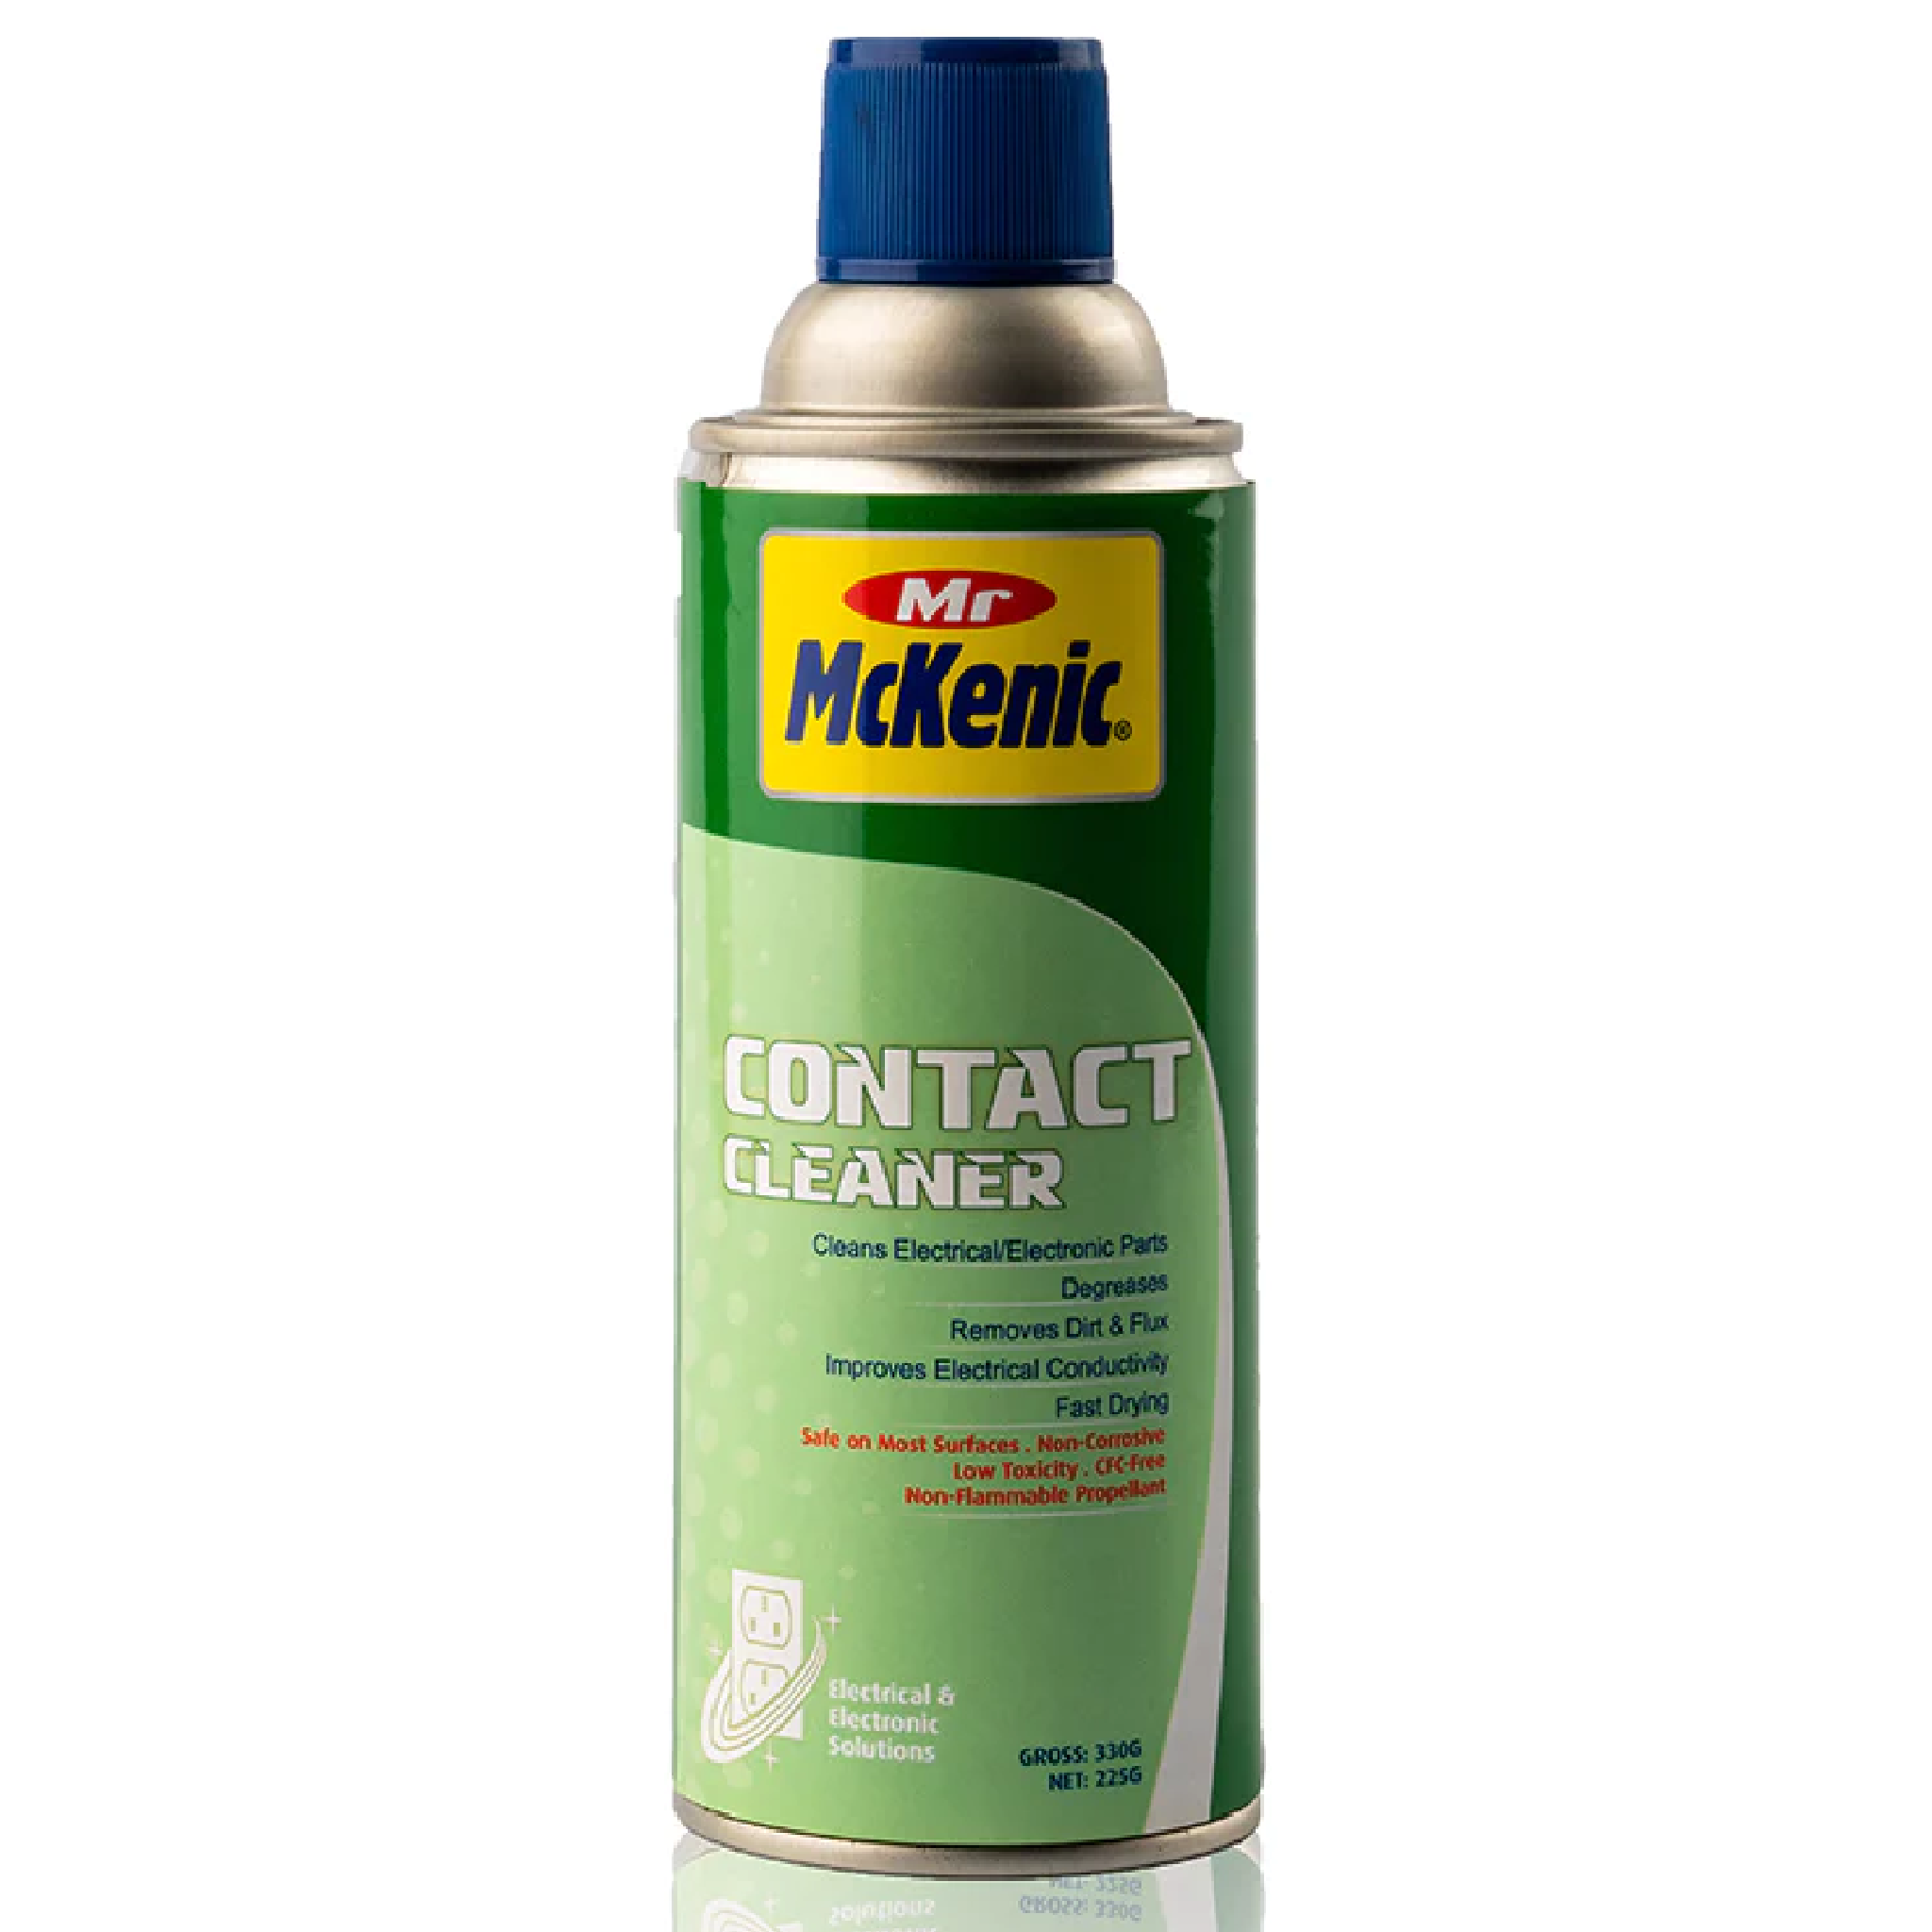 Mr McKenic Contact Cleaner 422g